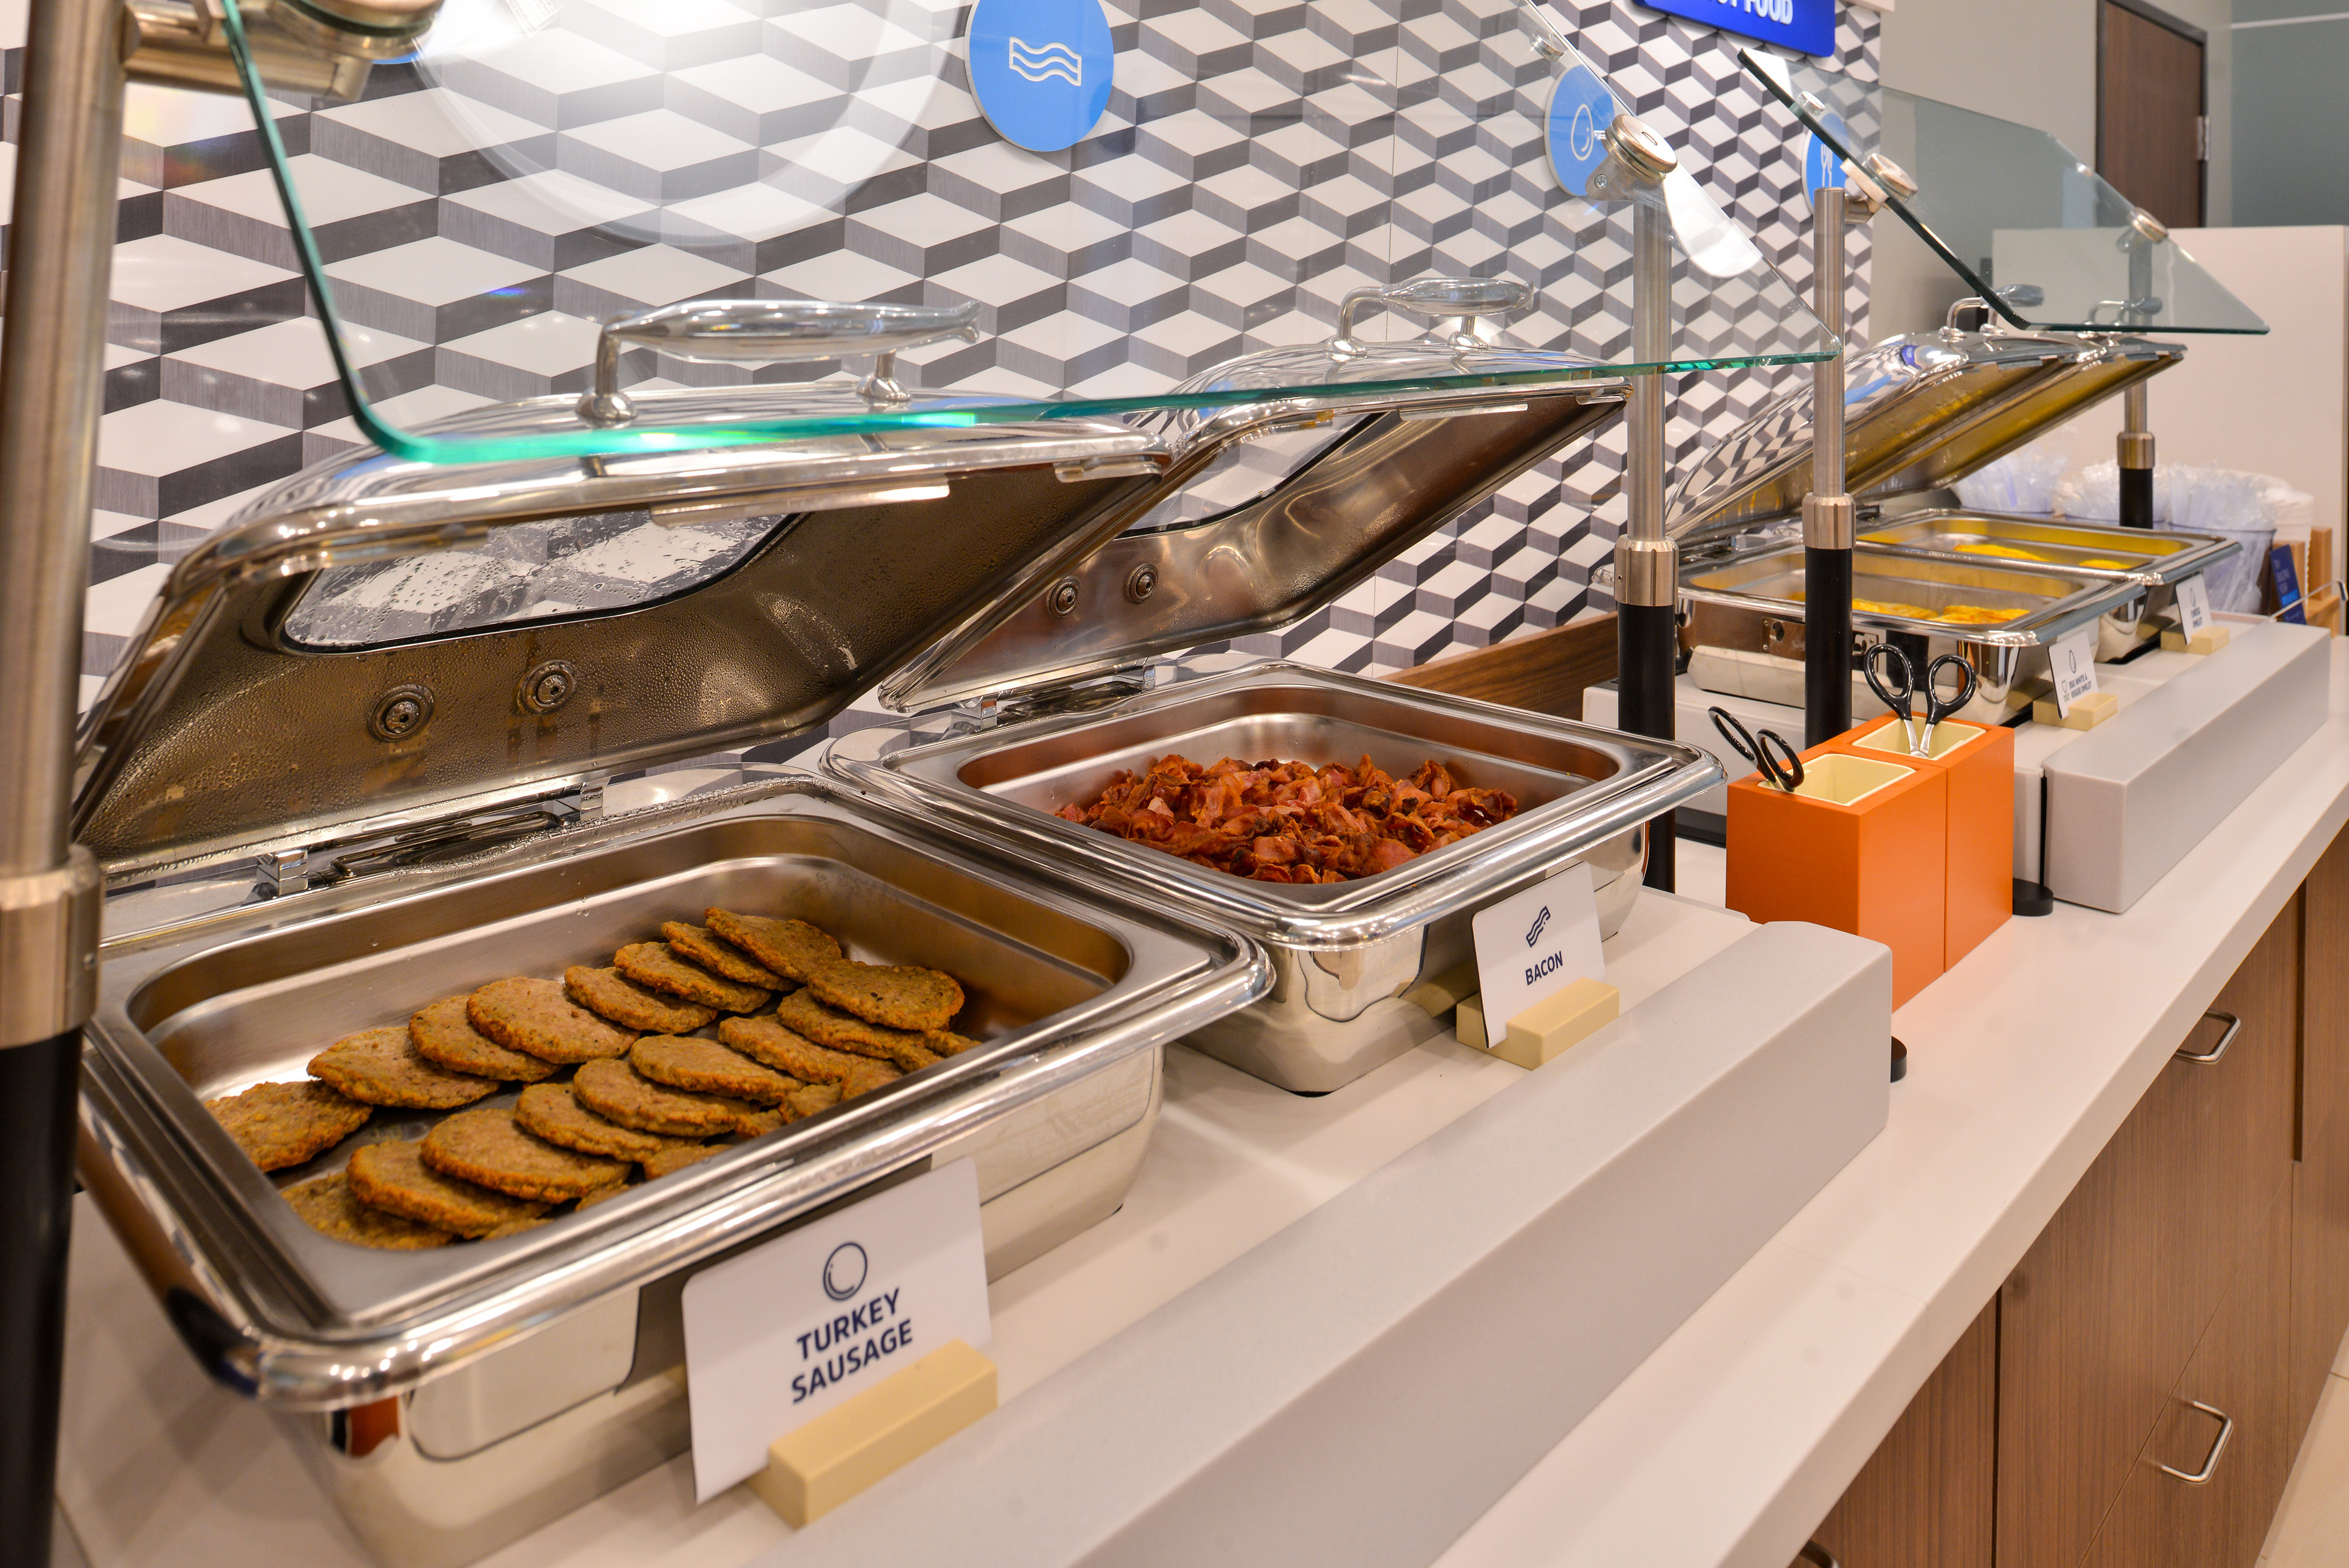 Indulge in the wide selection of food in our Breakfast Buffet.